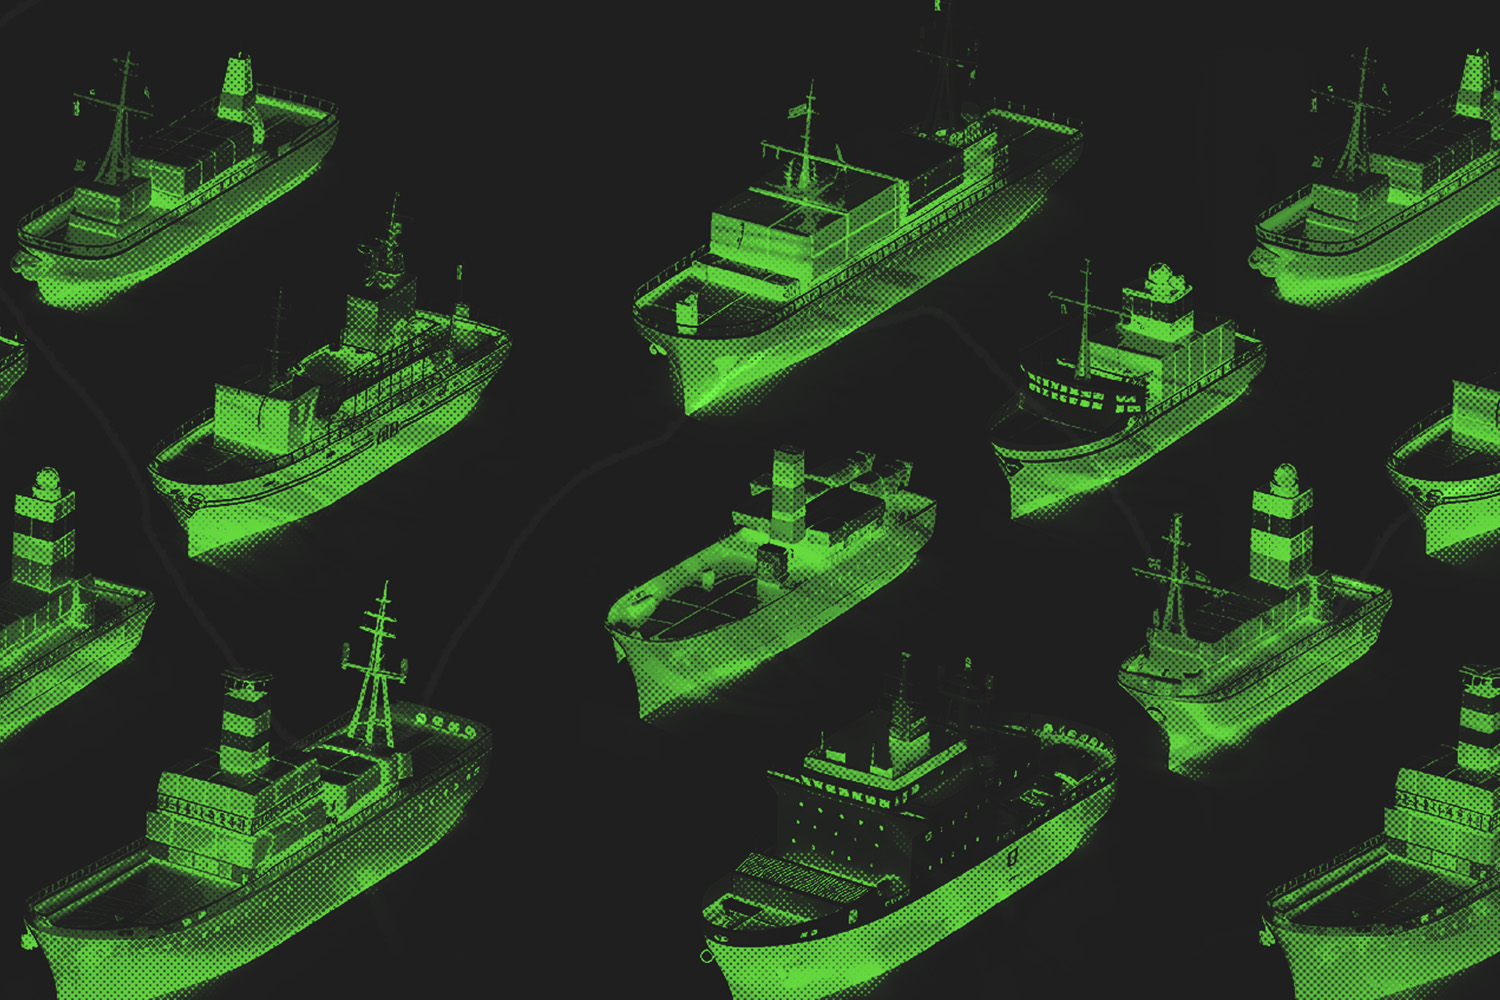 Green cargo ships on a black background.